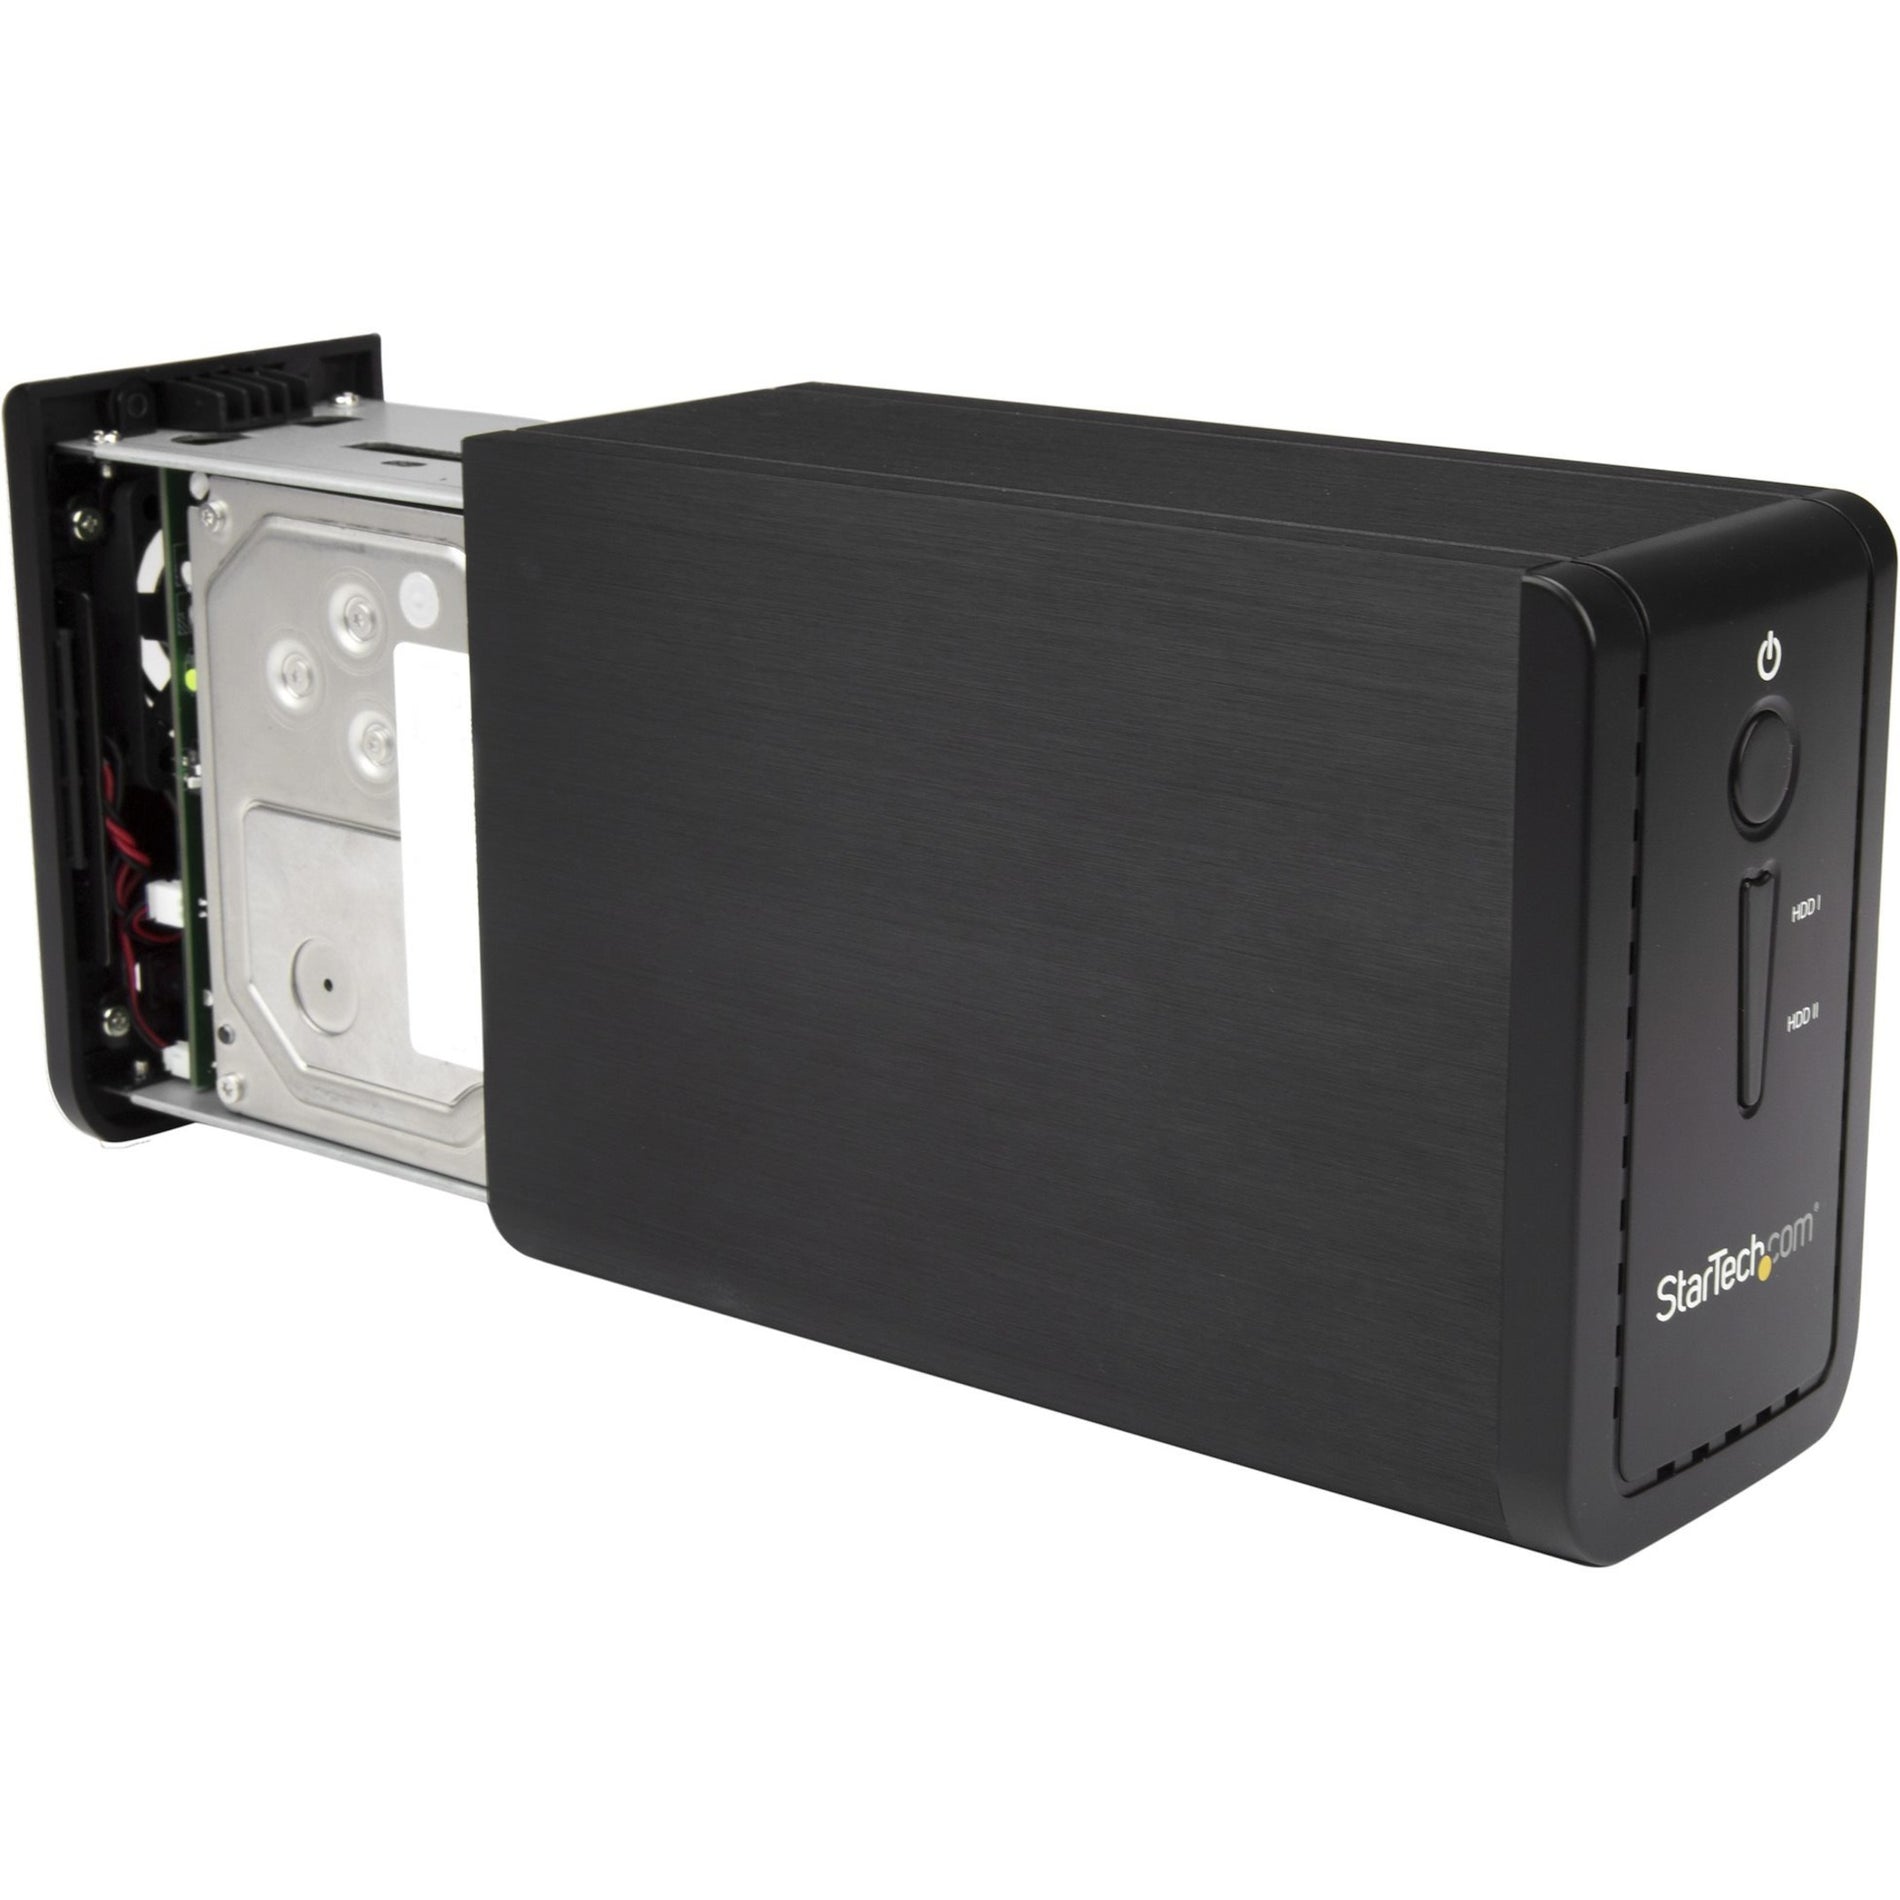 StarTech.com S352BU313R 2-Bay 3.5" HDD Enclosure with RAID - USB 3.1 - SATA (6Gbps) - Dual 3.5" HDD/SSD/SSHD External Drive Enclosure - USB-C and USB-A, High-Speed Data Transfer and Storage Solution